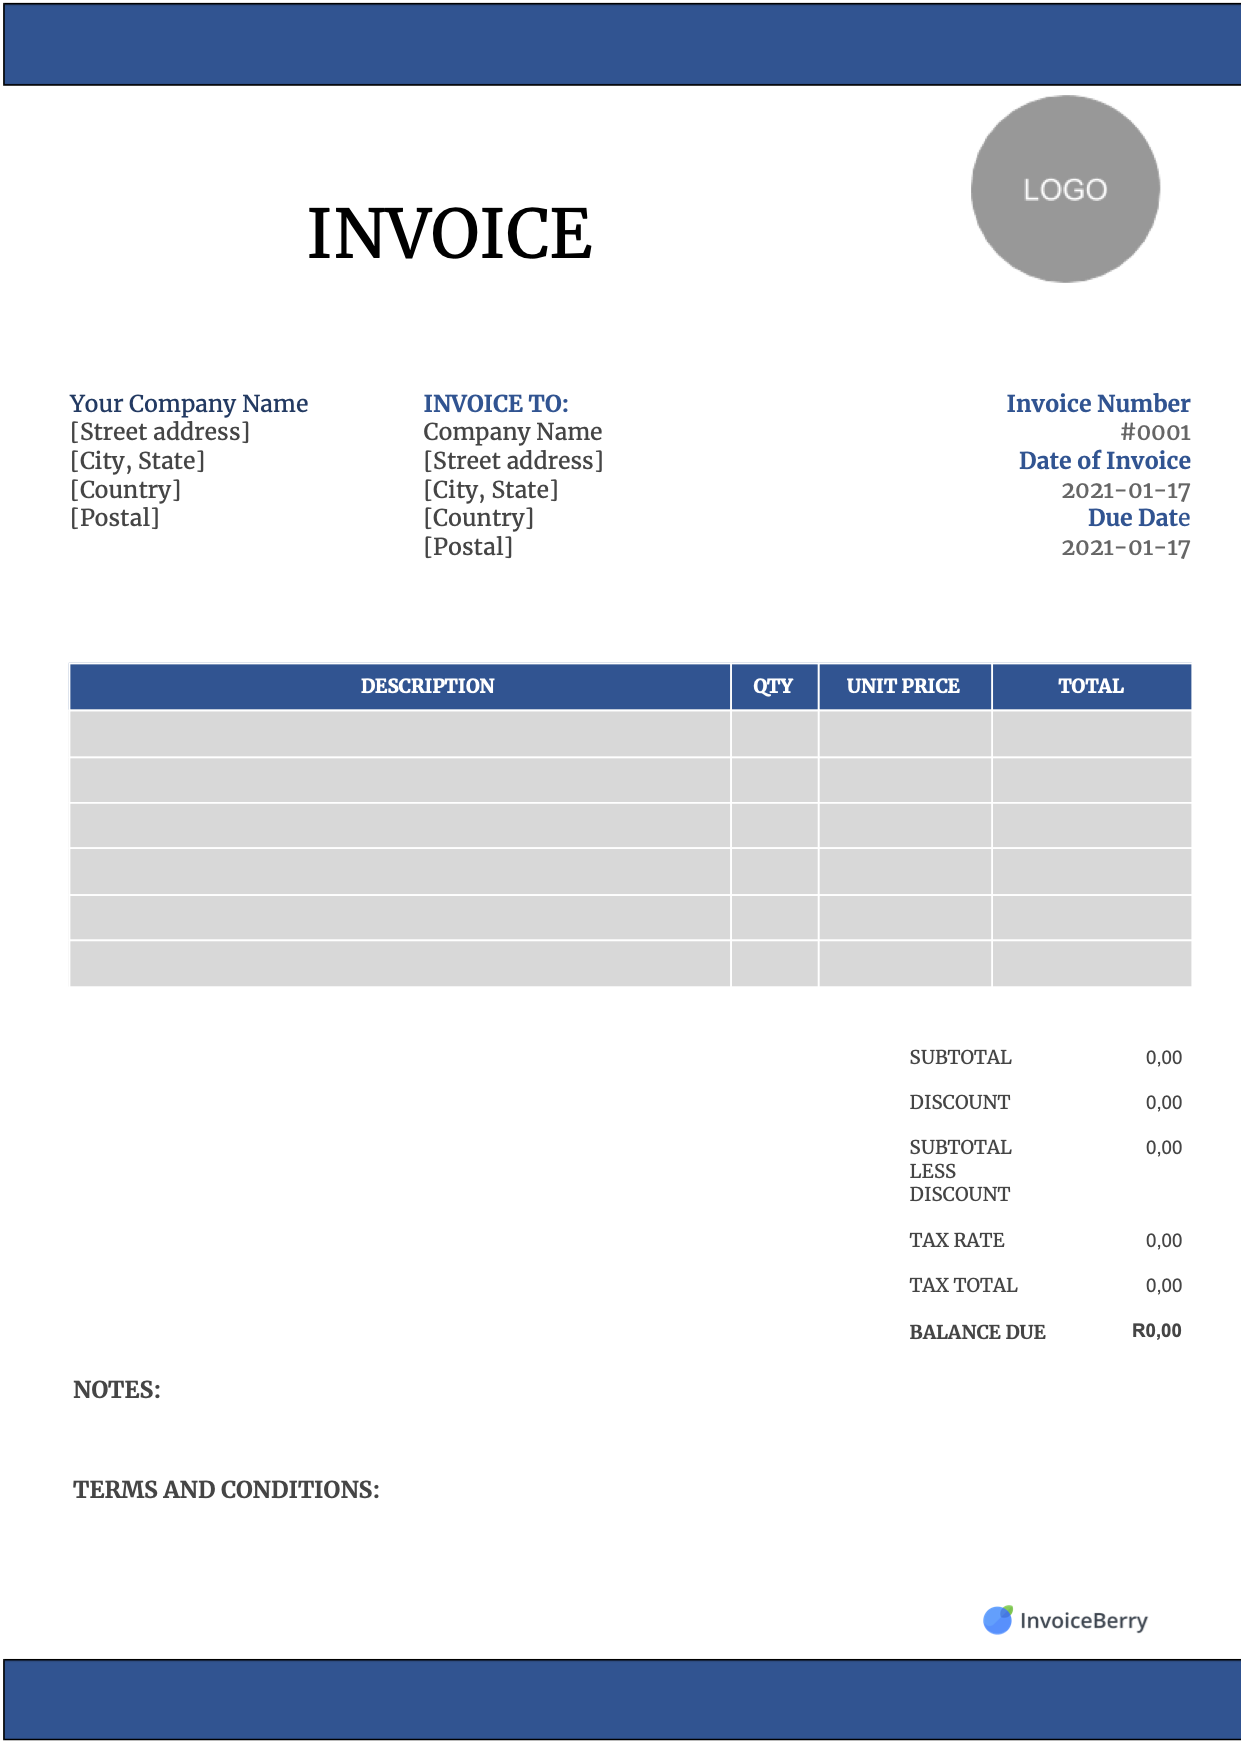 Free Invoice Templates Download - All Formats and Industries Inside Sample Tax Invoice Template Australia